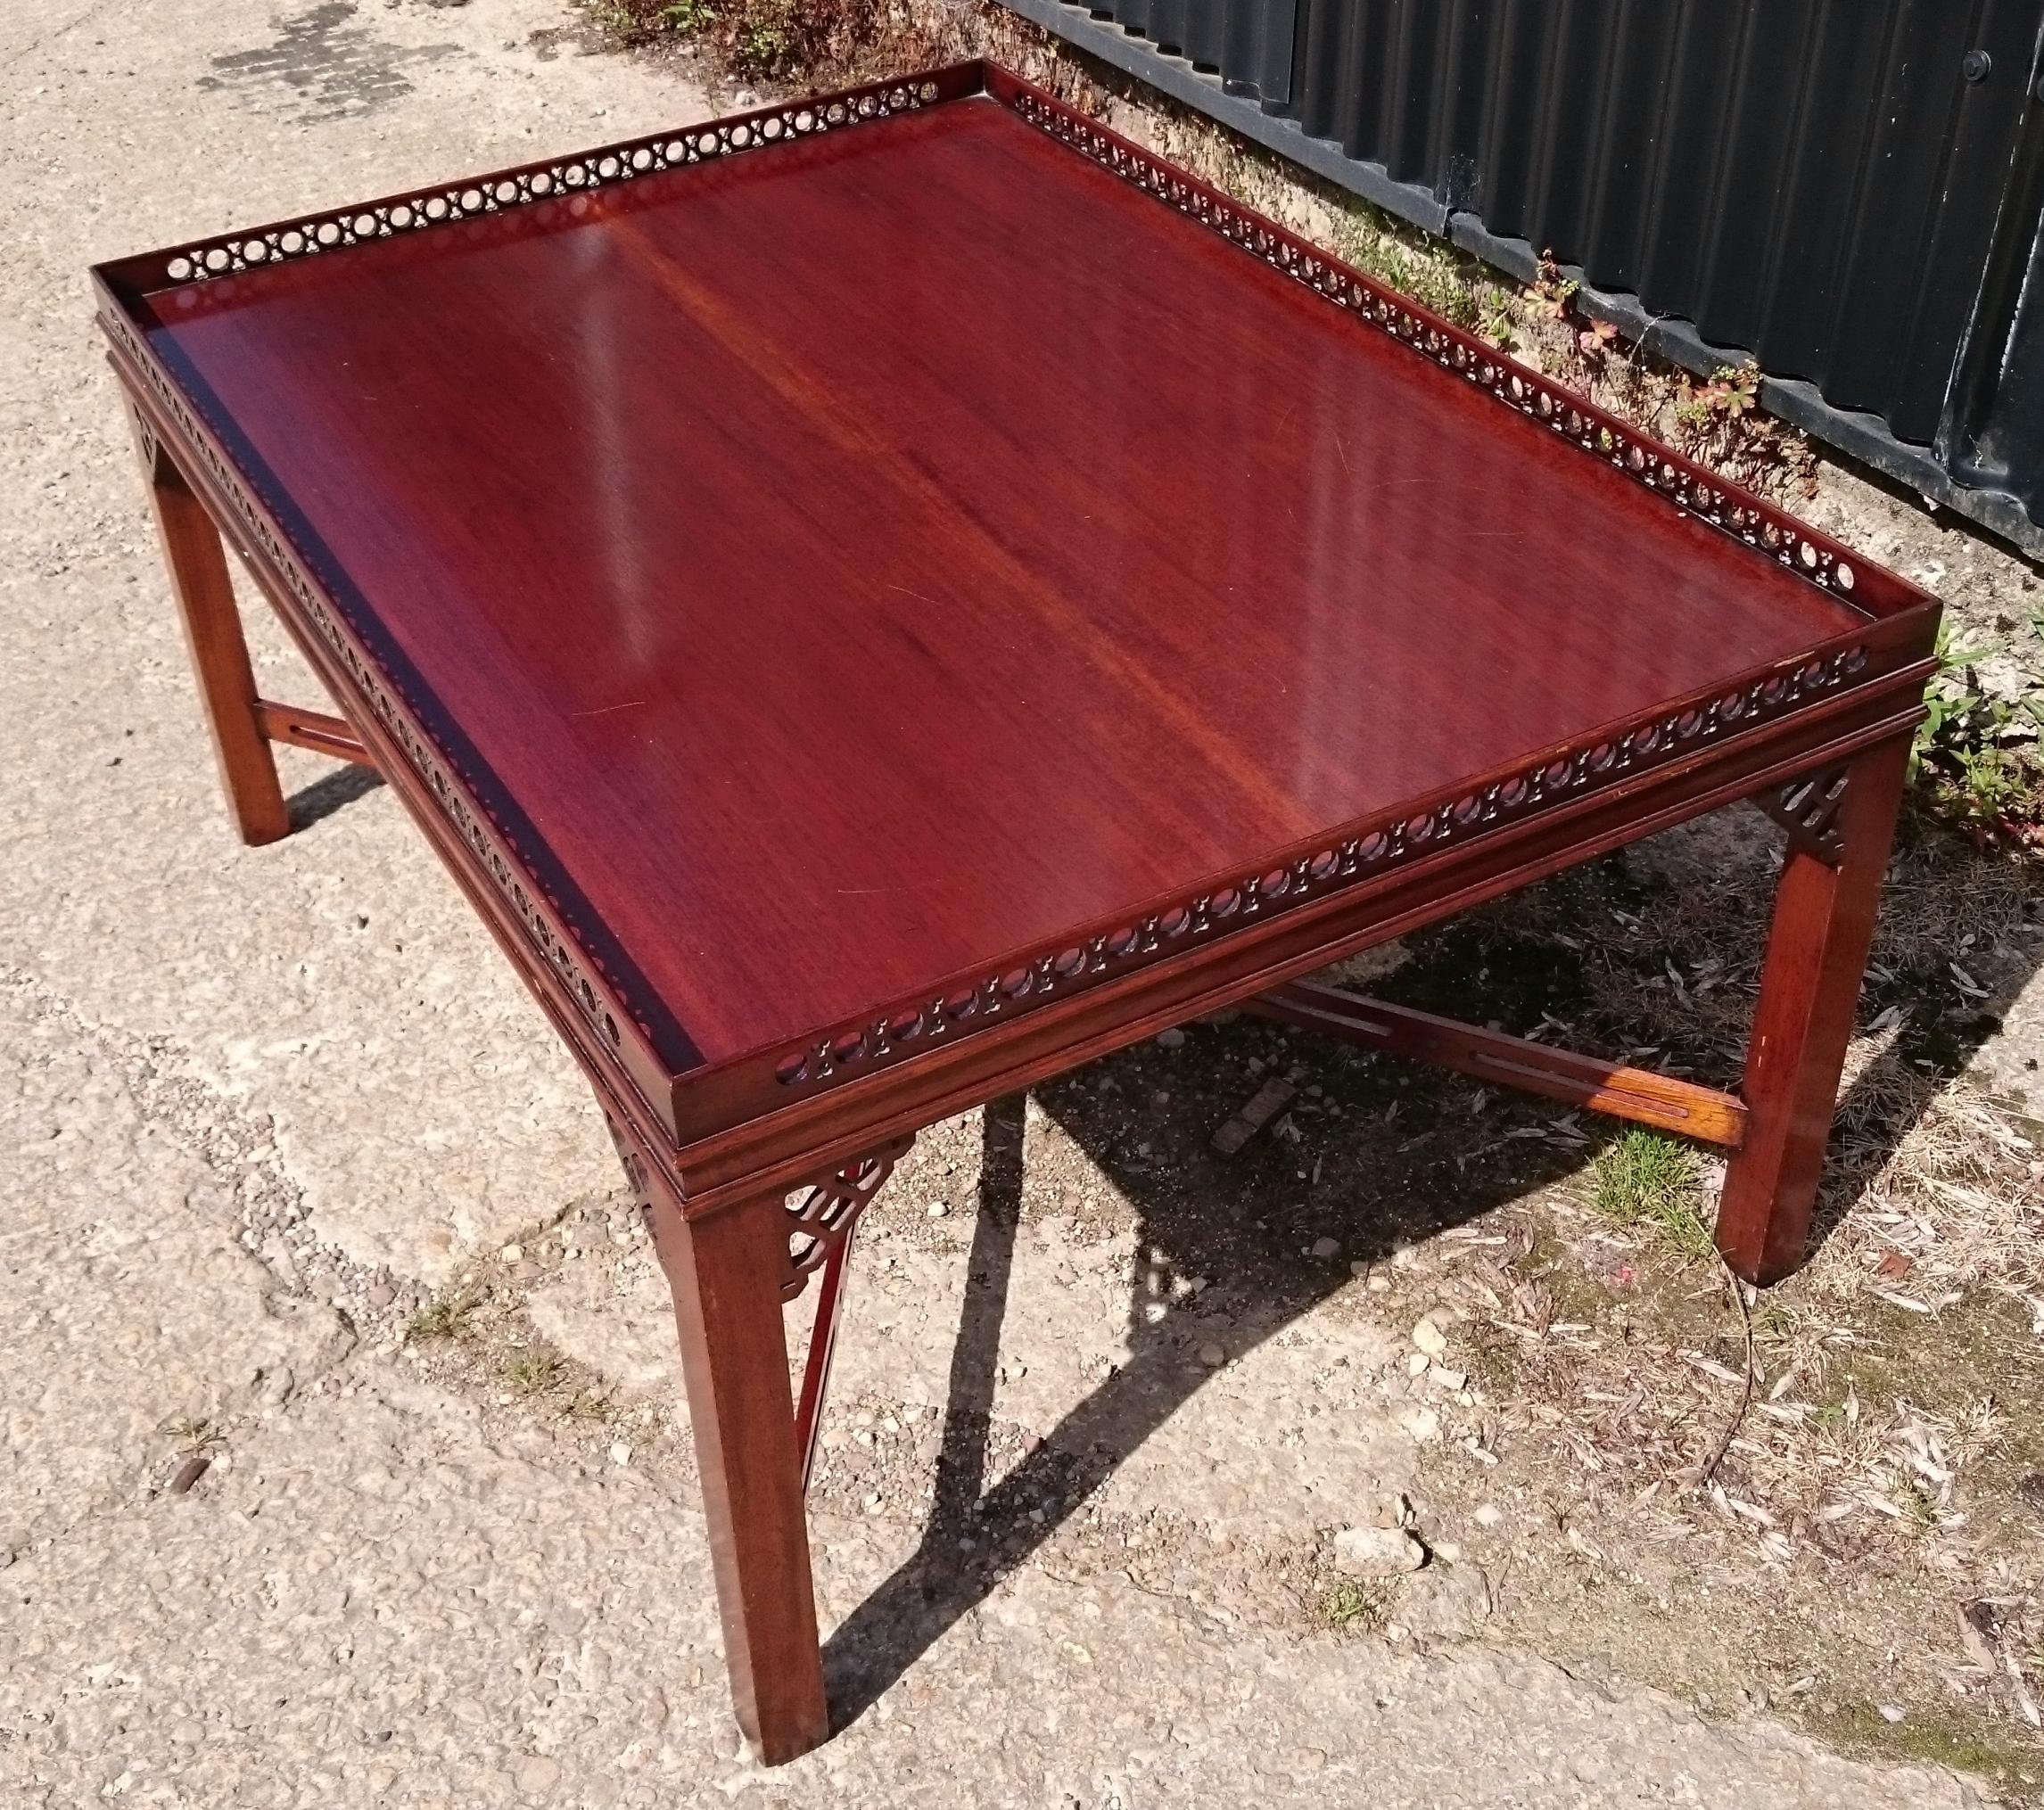 Unusually large mahogany coffee table in the manner of Thomas Chippendale, it has pierced latticework to the gallery and the X-frame cross stretchers. This coffee table is a larger and a lot better made than usual and it must have cost a lot of